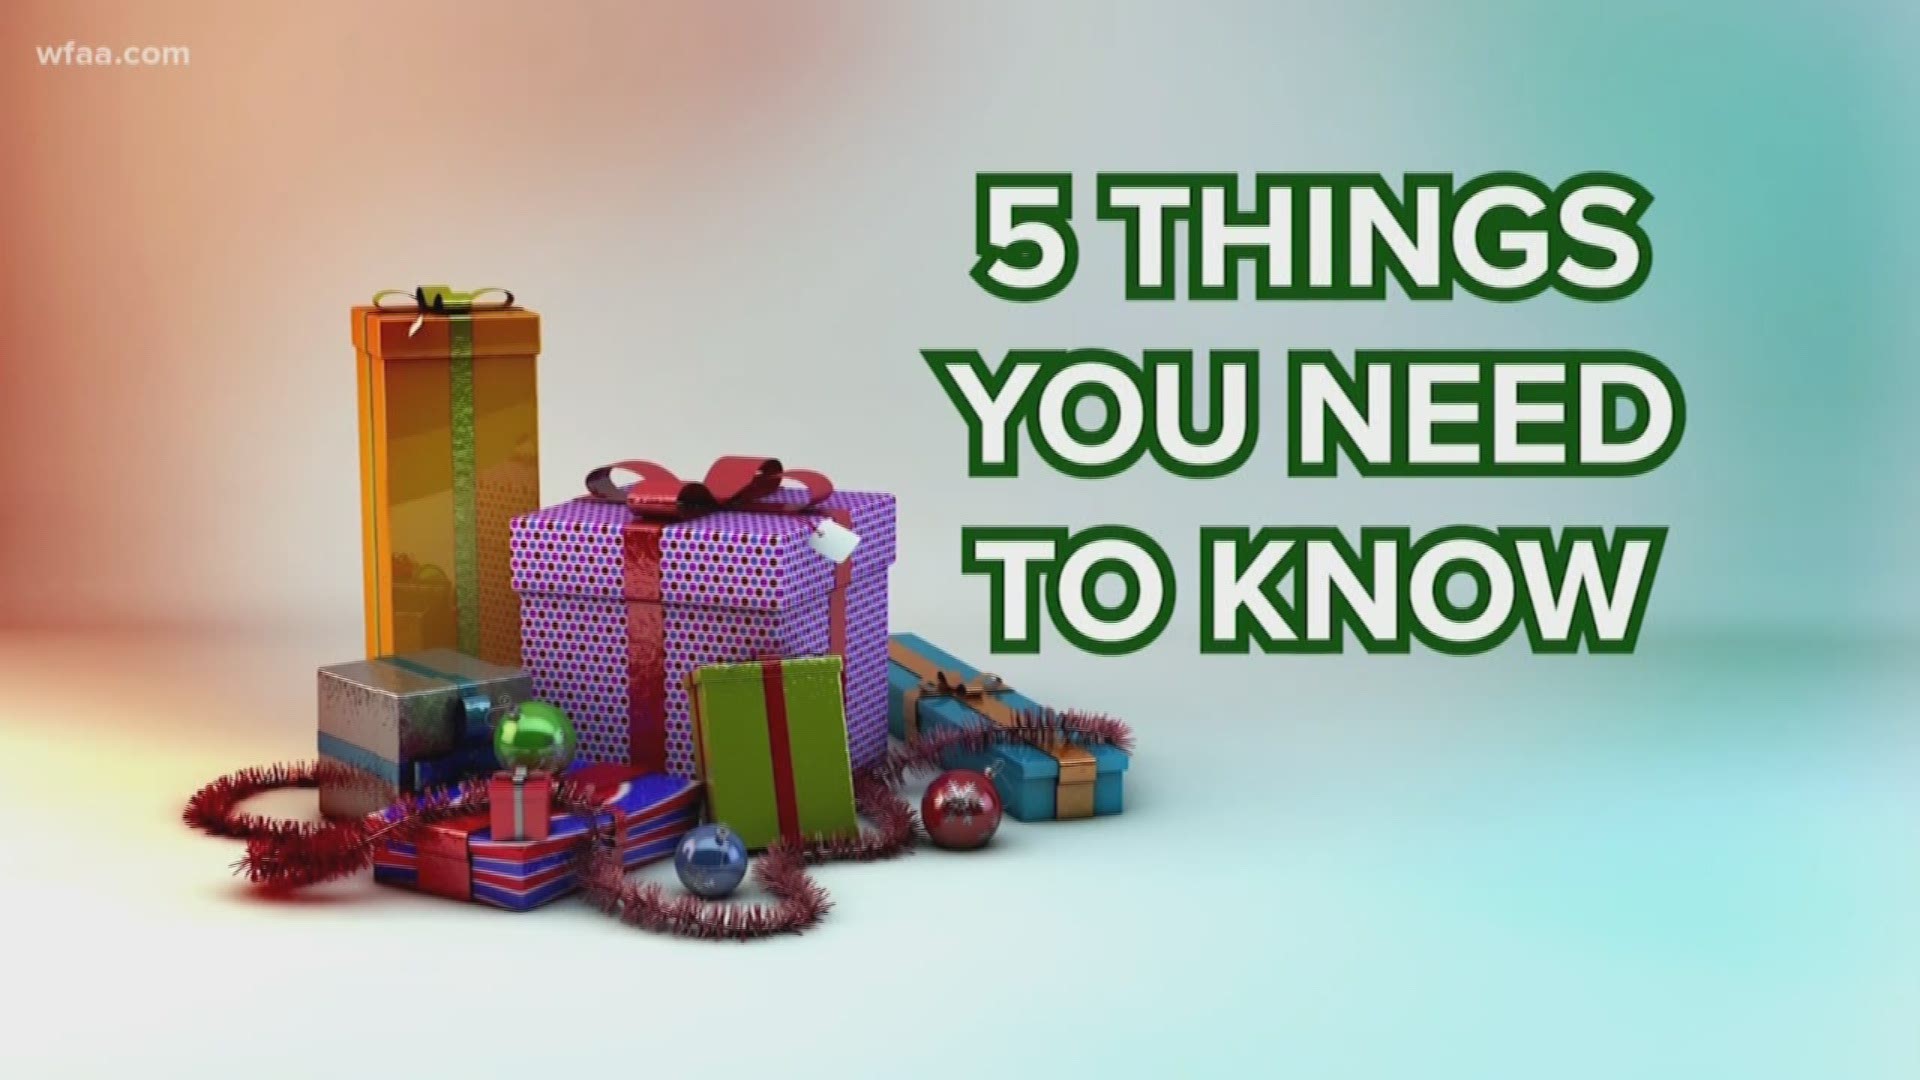 Eric Alvarez breaks down the five things you need to know about recycling during the holidays.